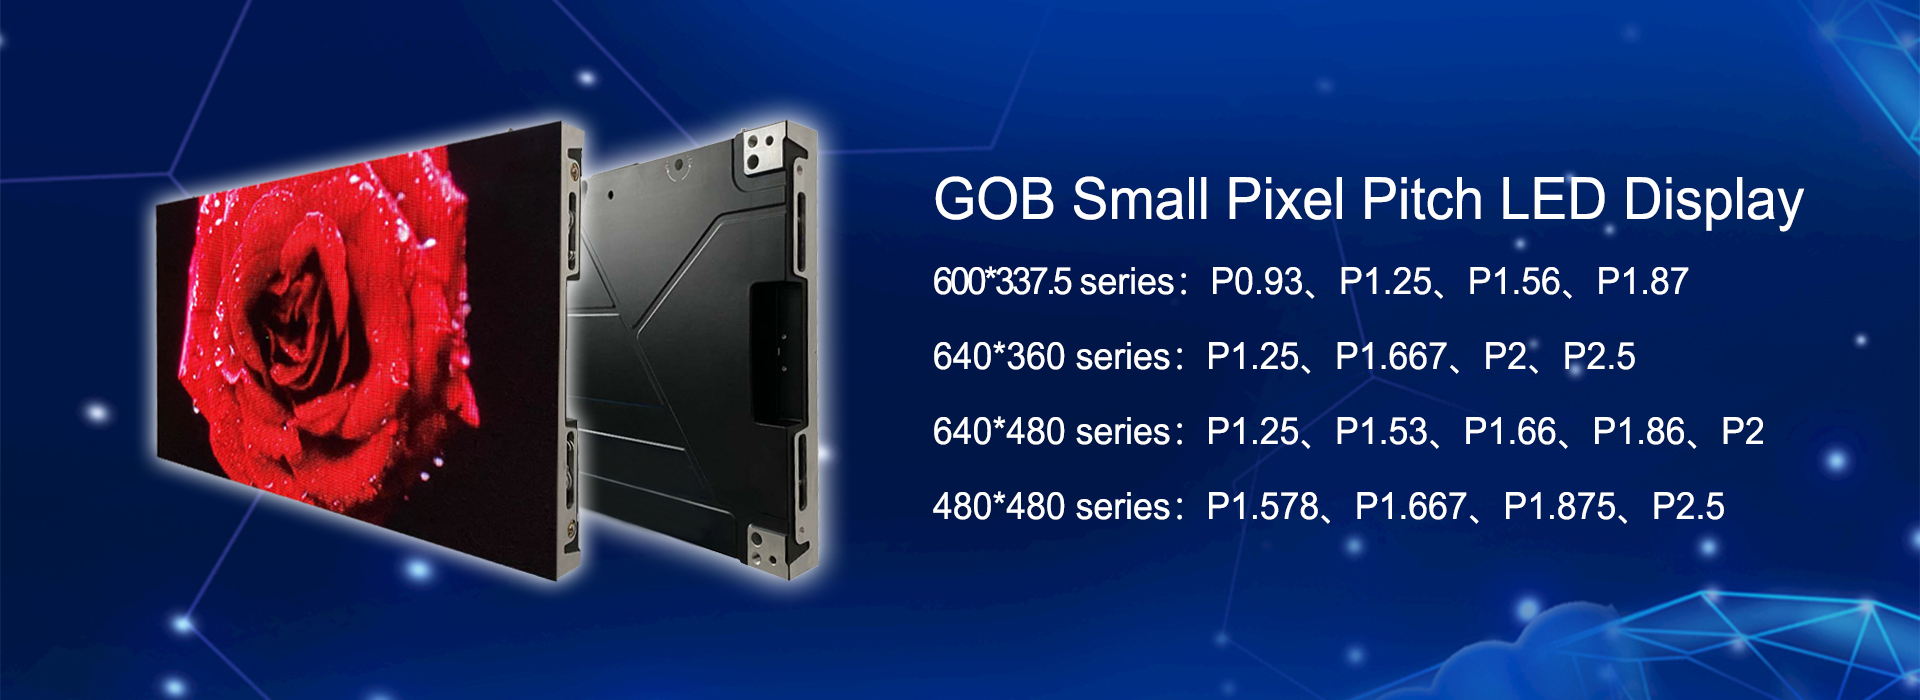 GOB small pixel pitch led display